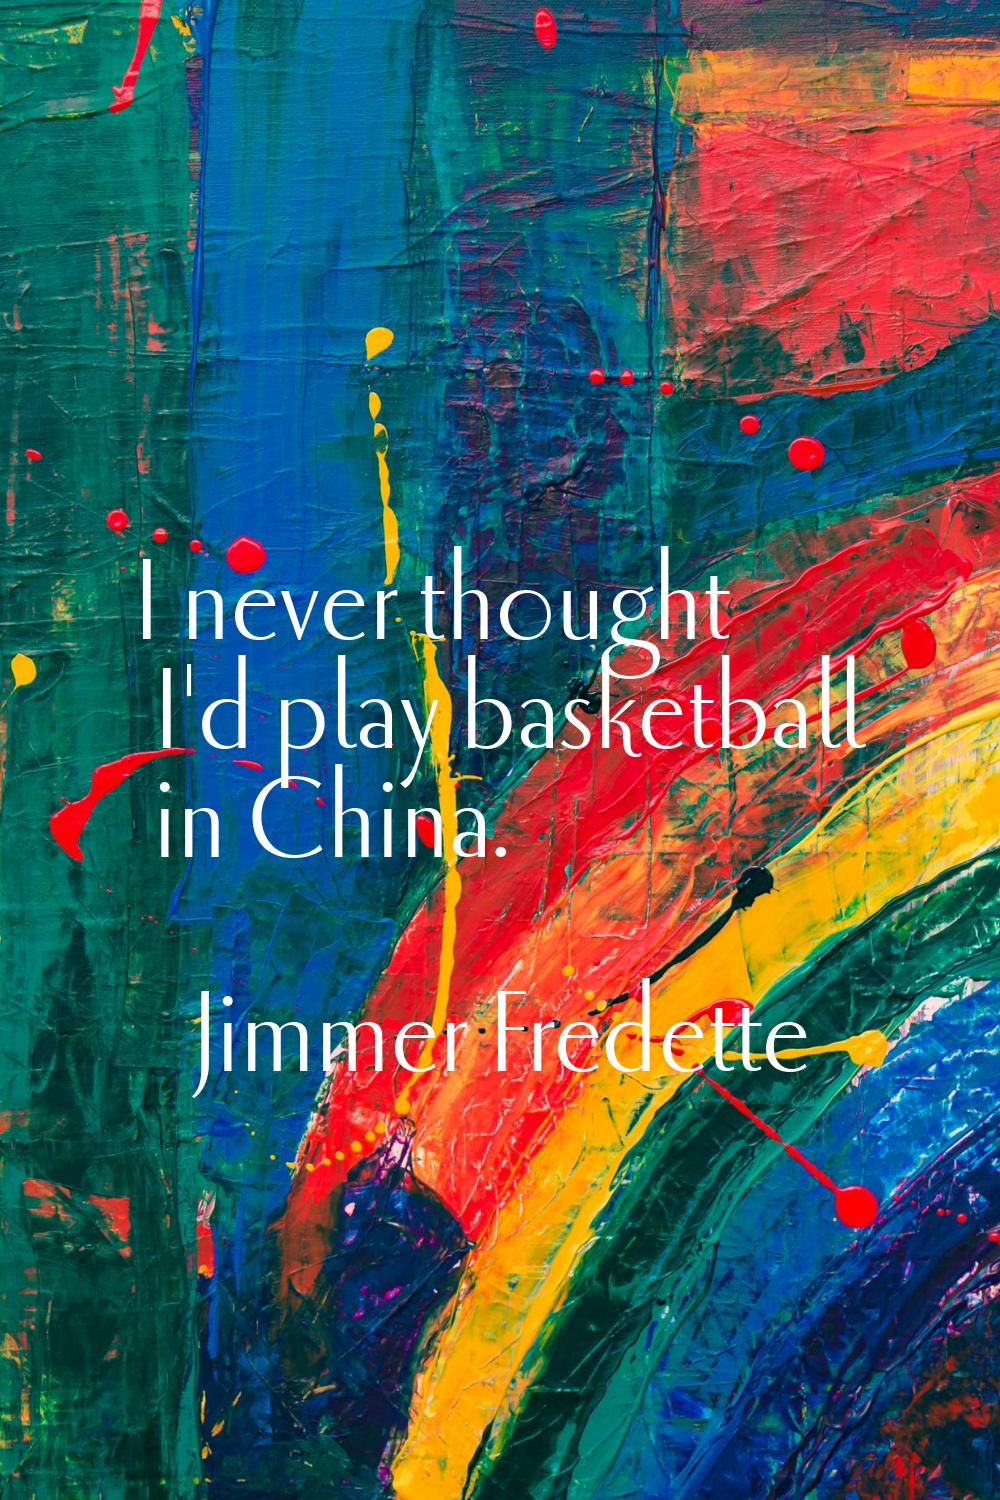 I never thought I'd play basketball in China.